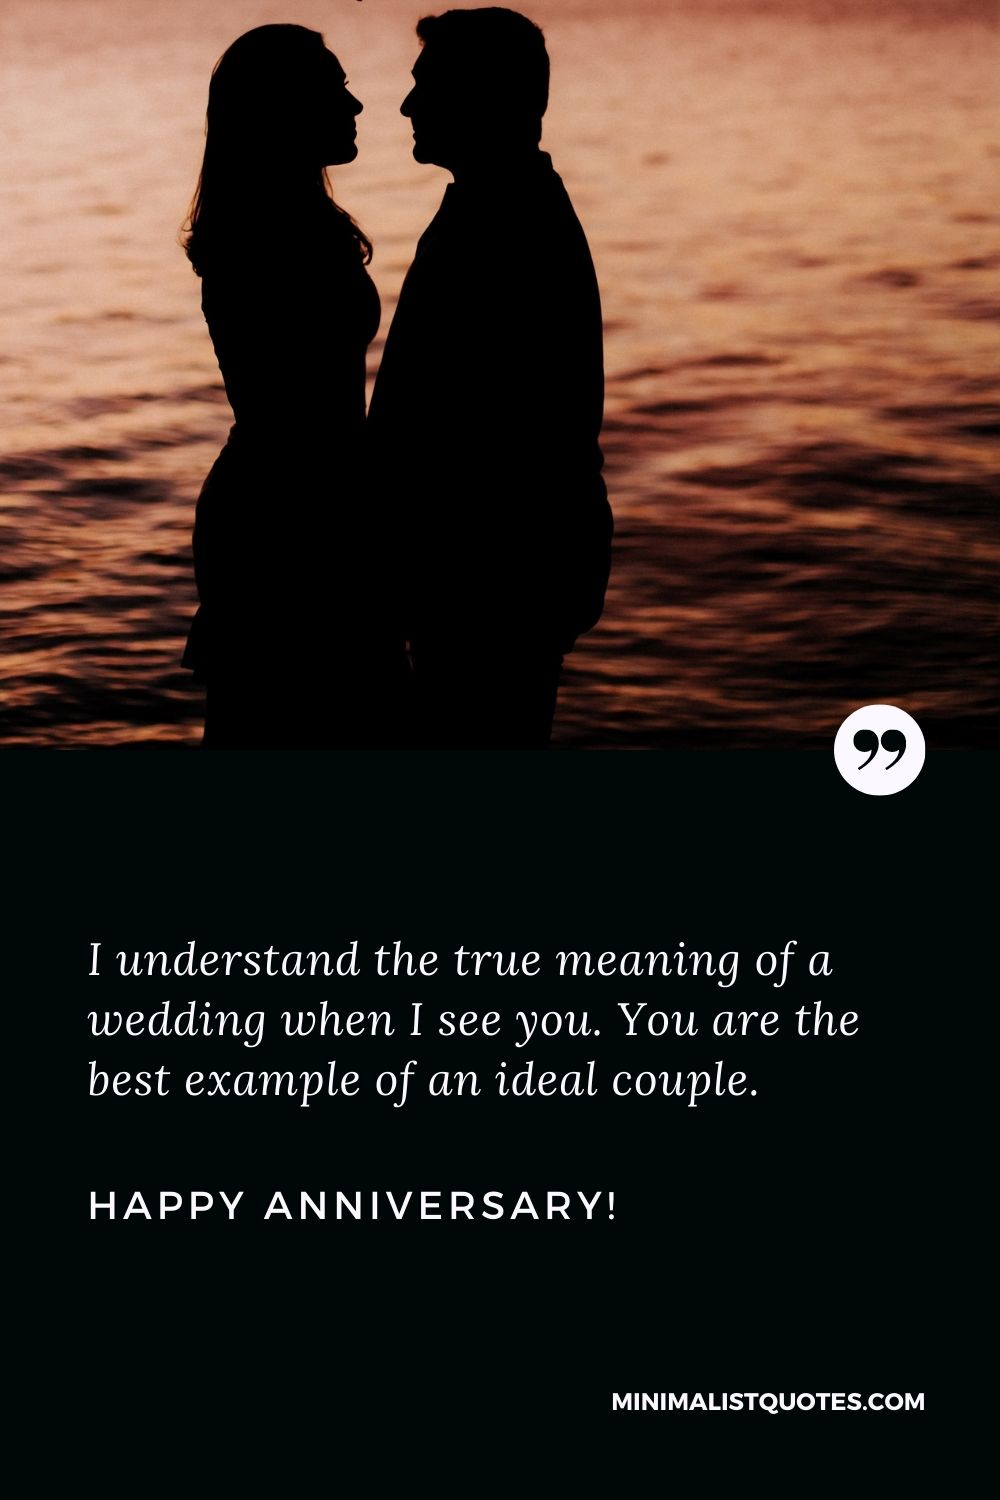 I understand the true meaning of a wedding when I see you. You are ...